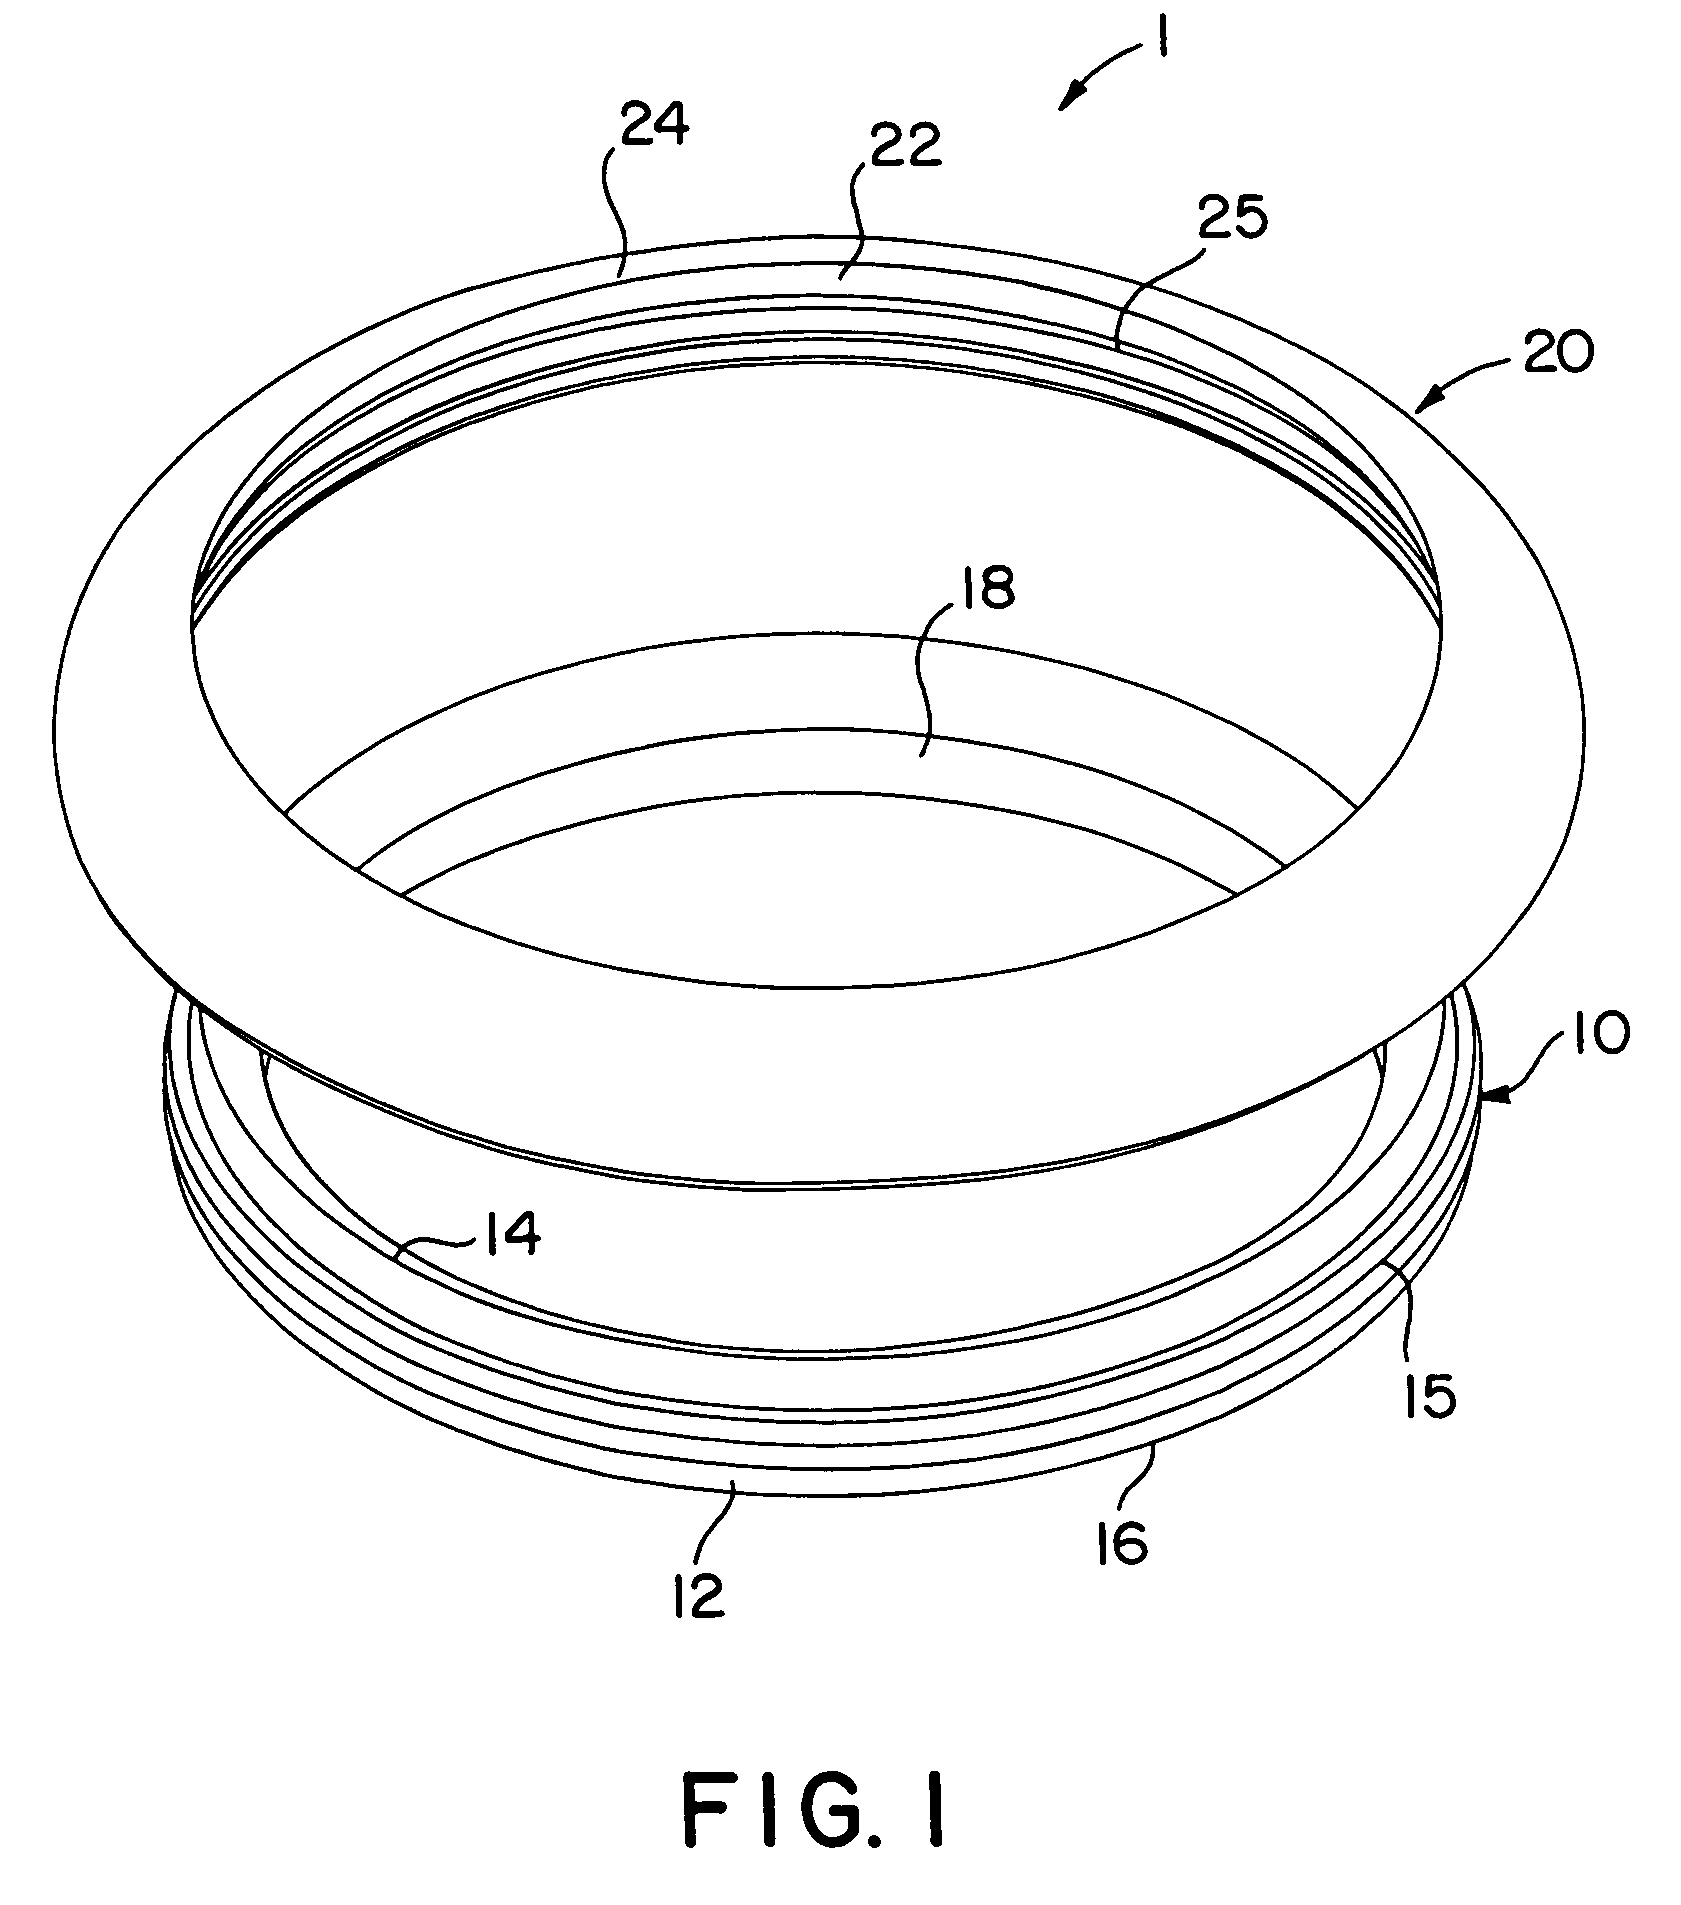 Automatic suture fixation apparatus and method for minimally invasive cardiac surgery